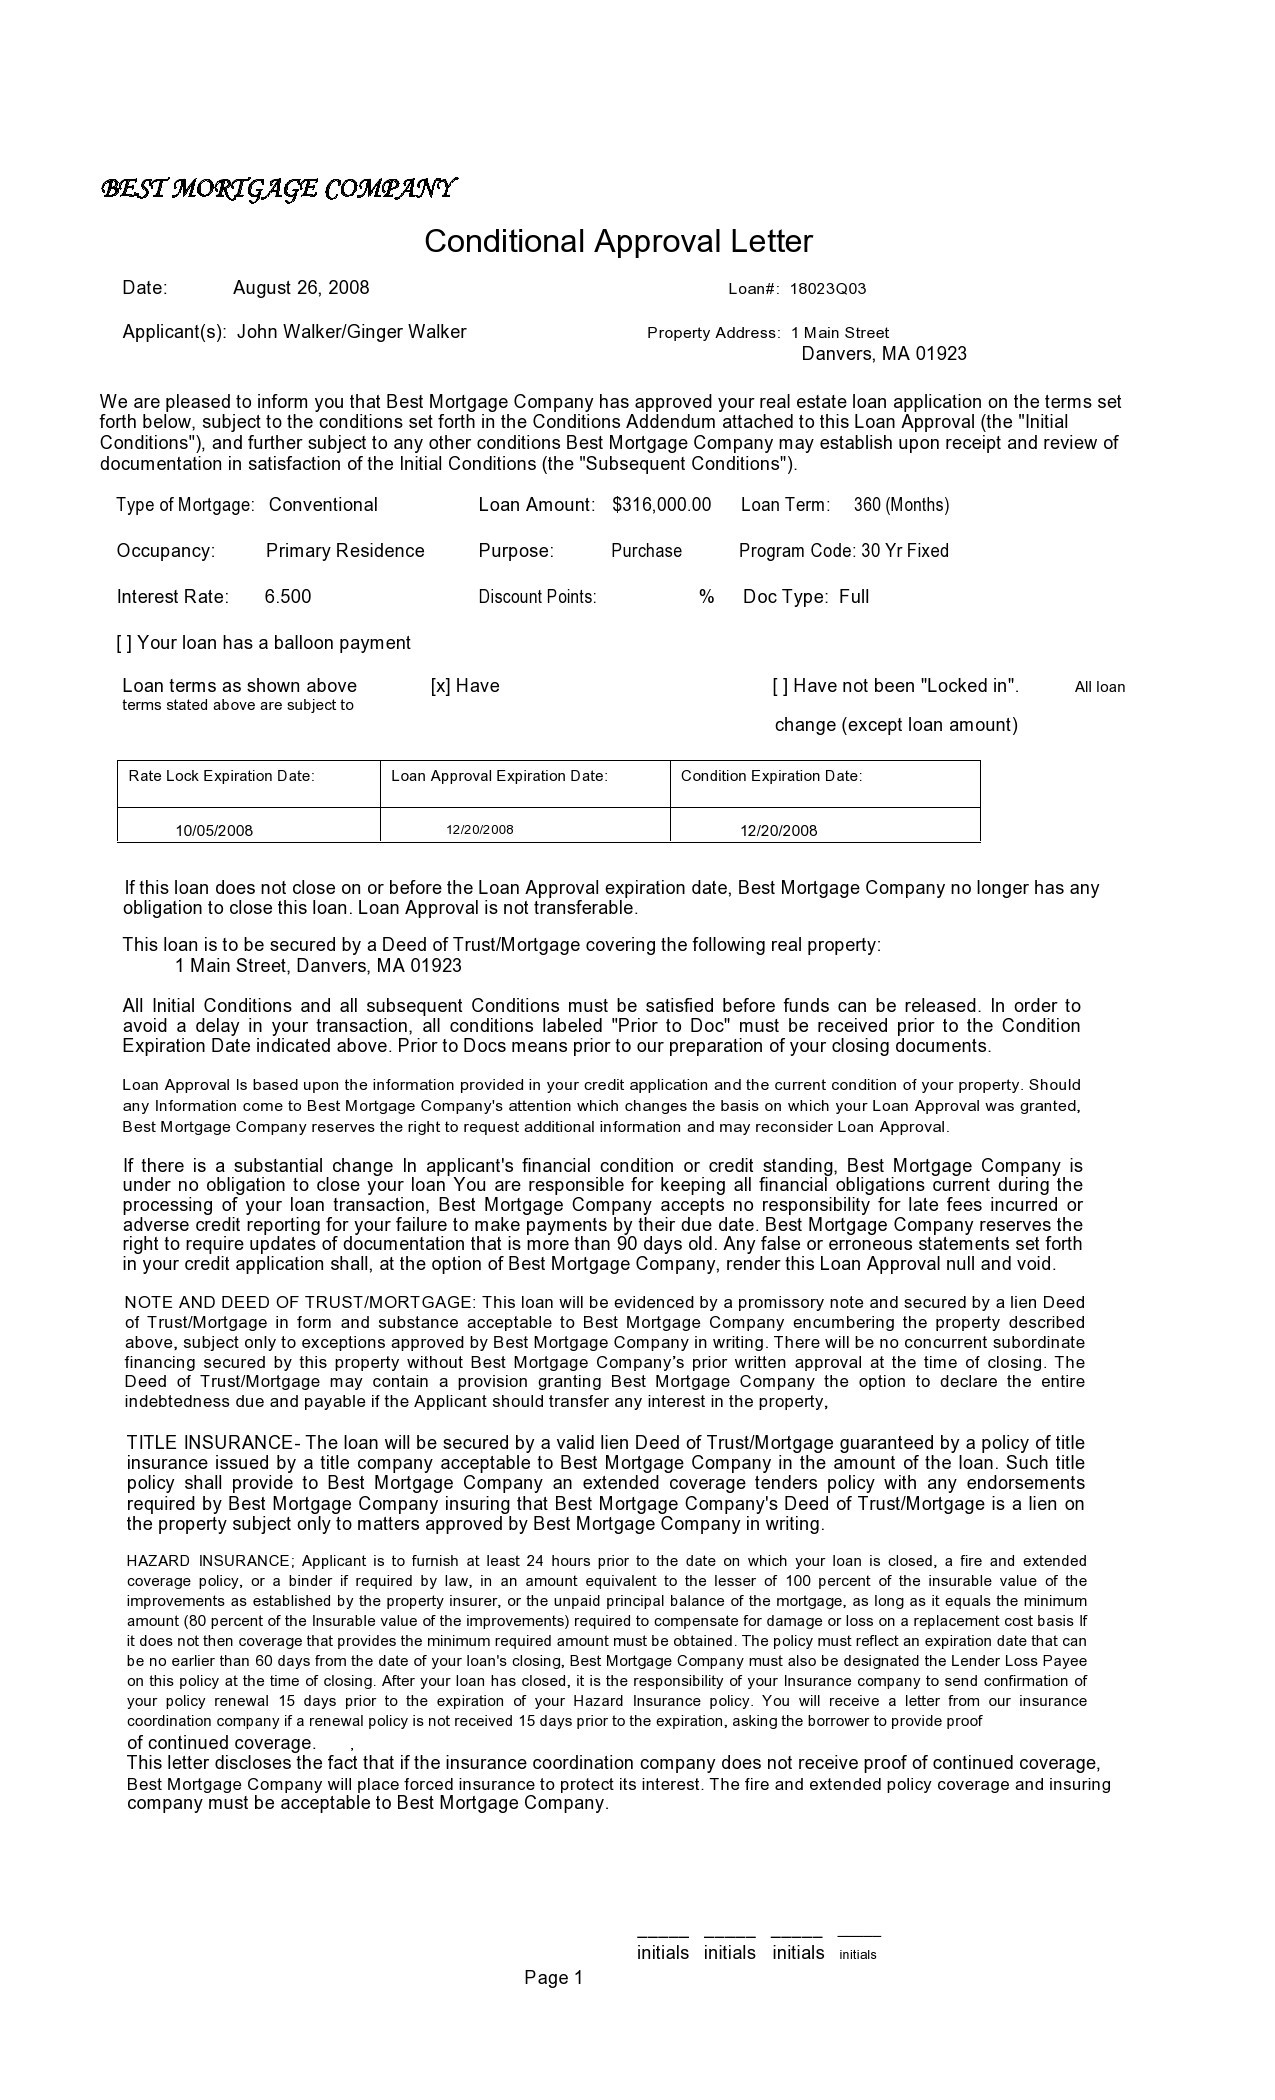 Free pre approval letter 18